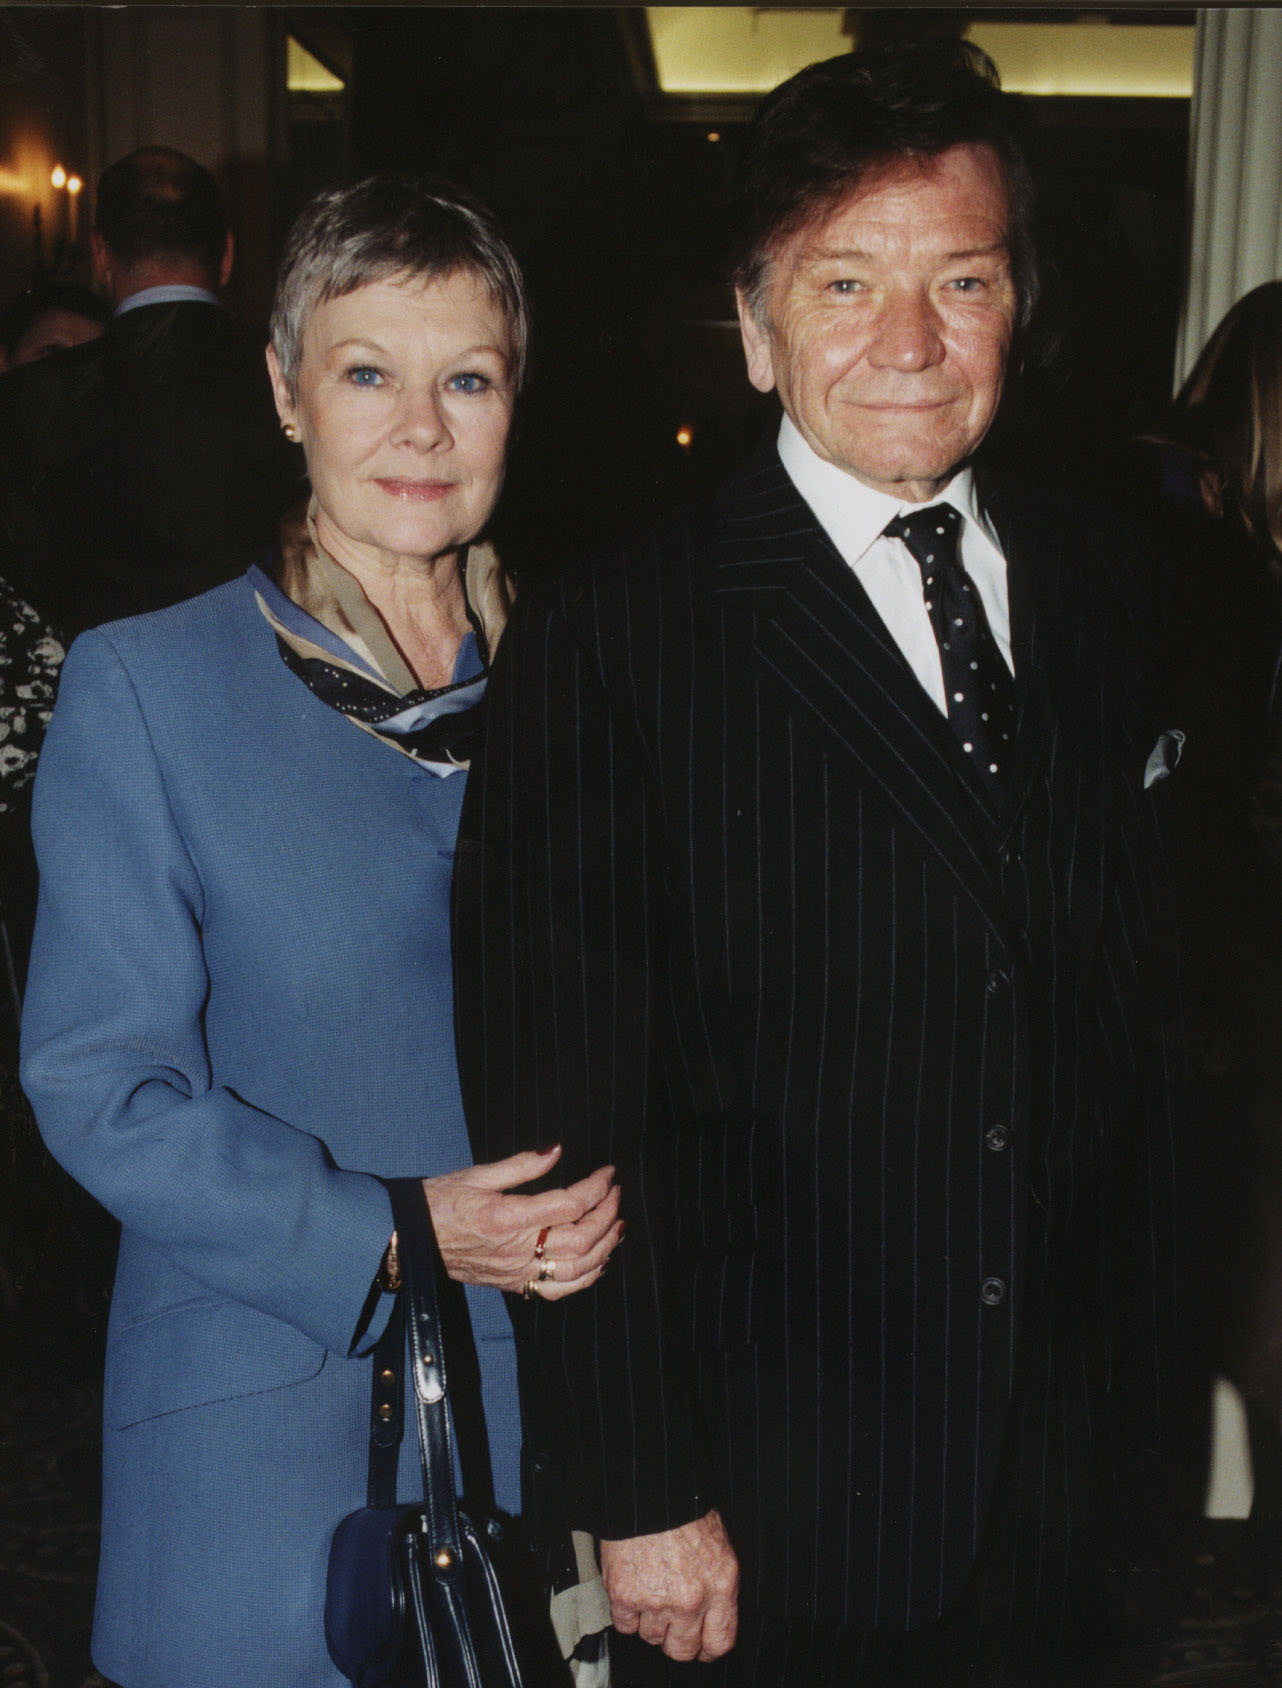 Dame Judi Dench and Michael Williams at the Evening Standard Drama Awards in 1997. | Source: Getty Images